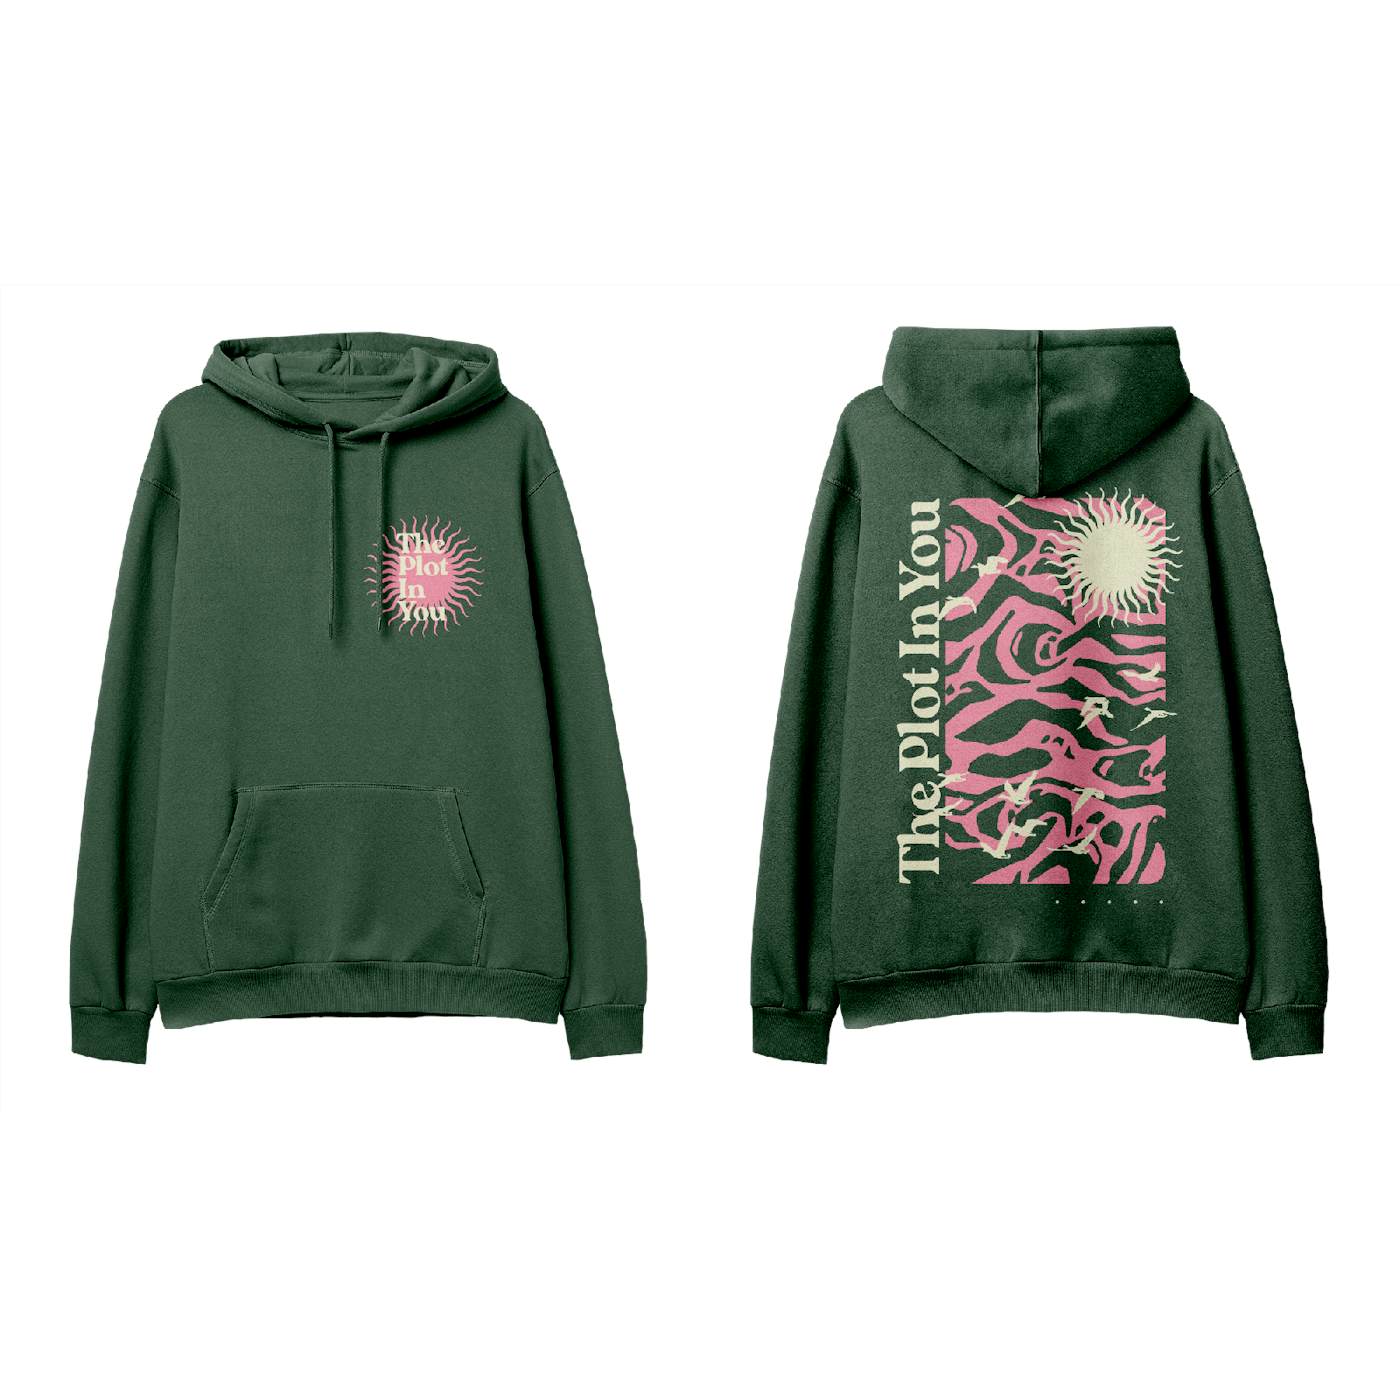 The Plot In You "Birds" Green Hoodie